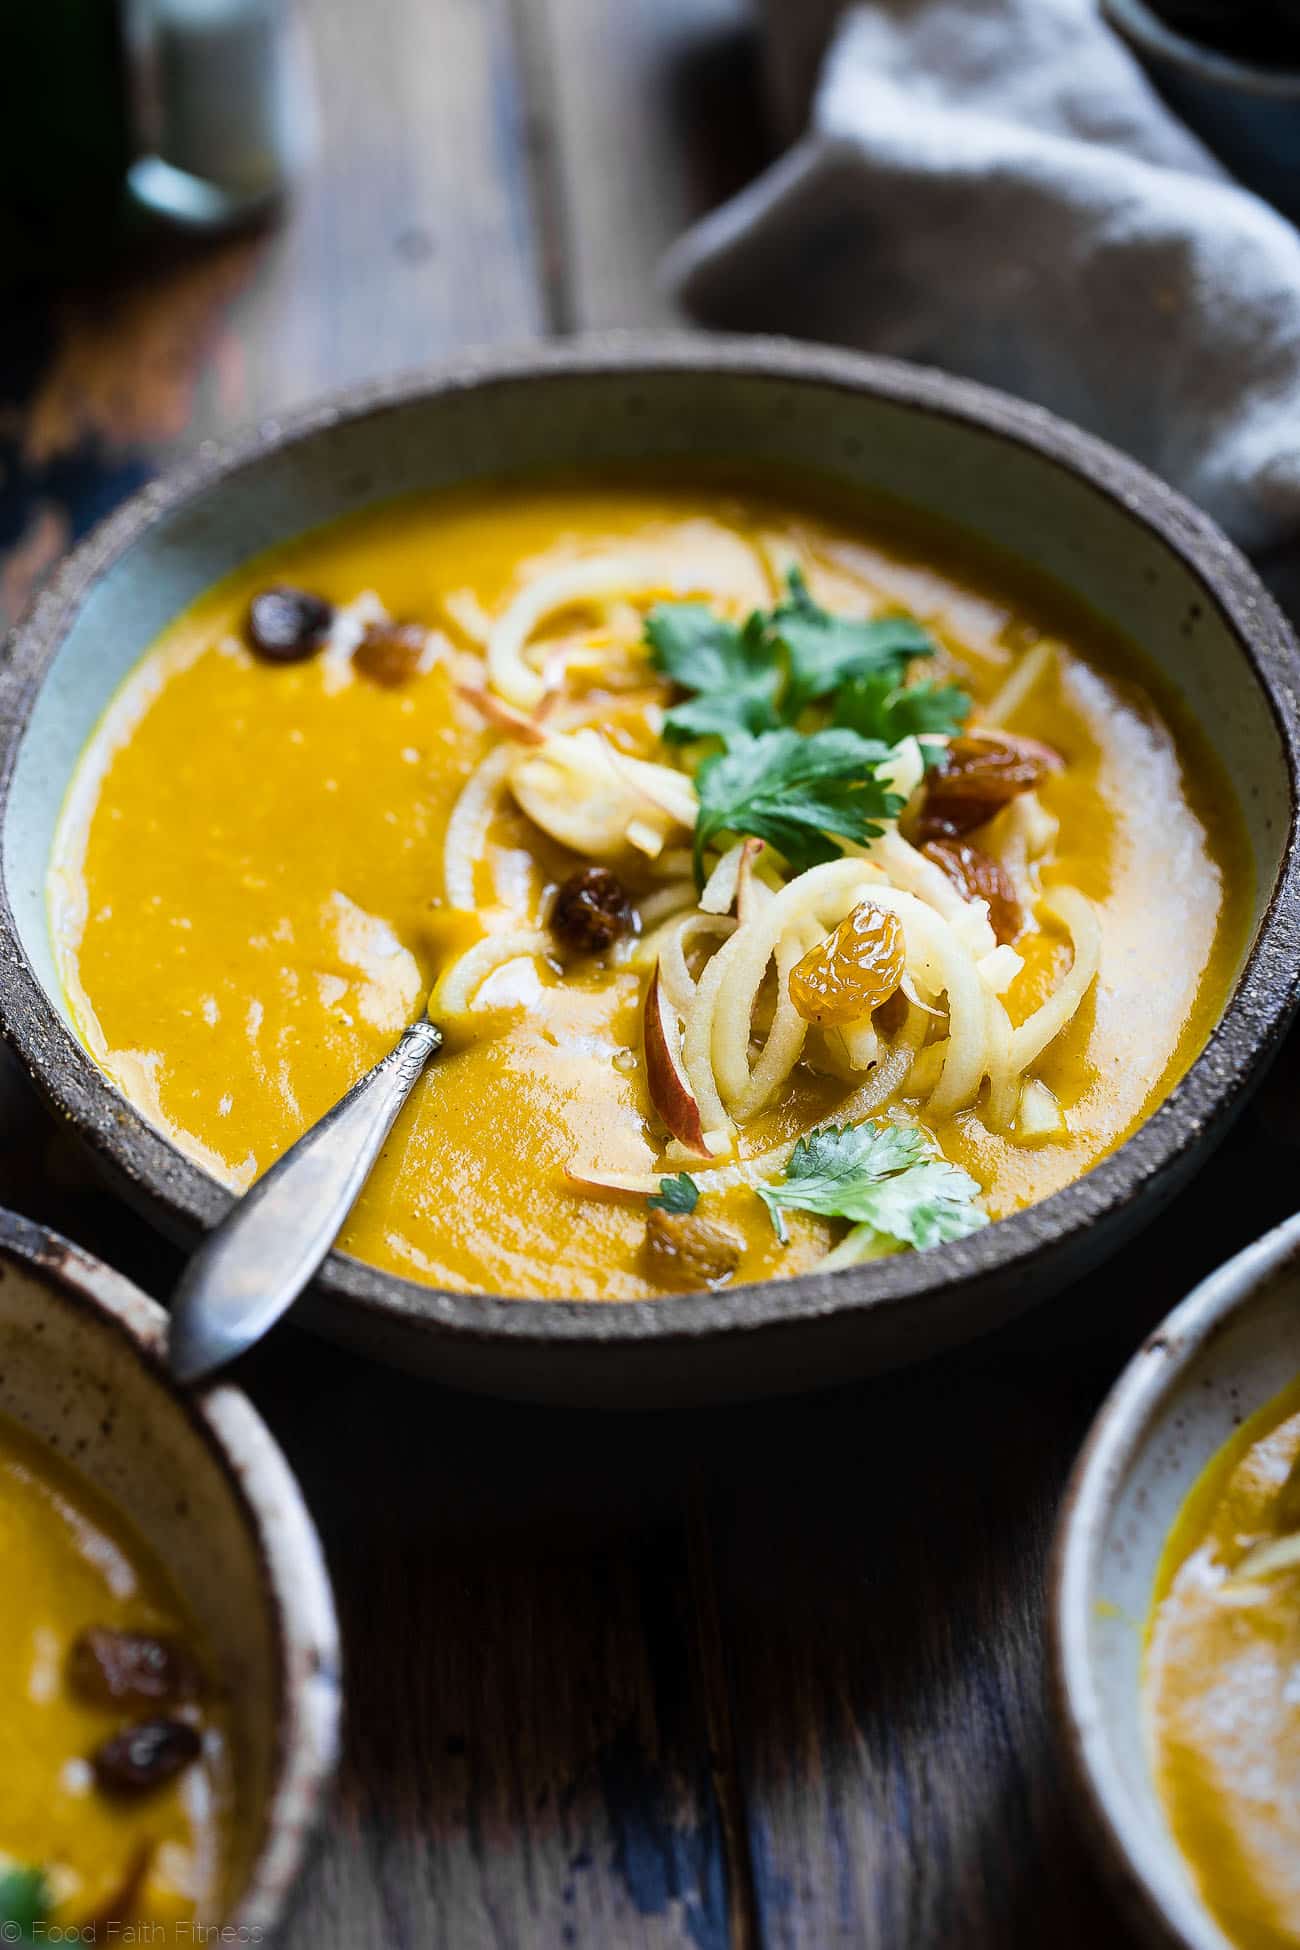 Slow Cooker Apple, Turmeric and Kabocha Squash Soup -  Let the slow cooker do the work for you with this anti-inflammatory paleo, vegan and whole30 compliant kabocha squash soup! It's an easy, healthy and gluten free fall meal! | Foodfaithfitness.com | @FoodFaithFit